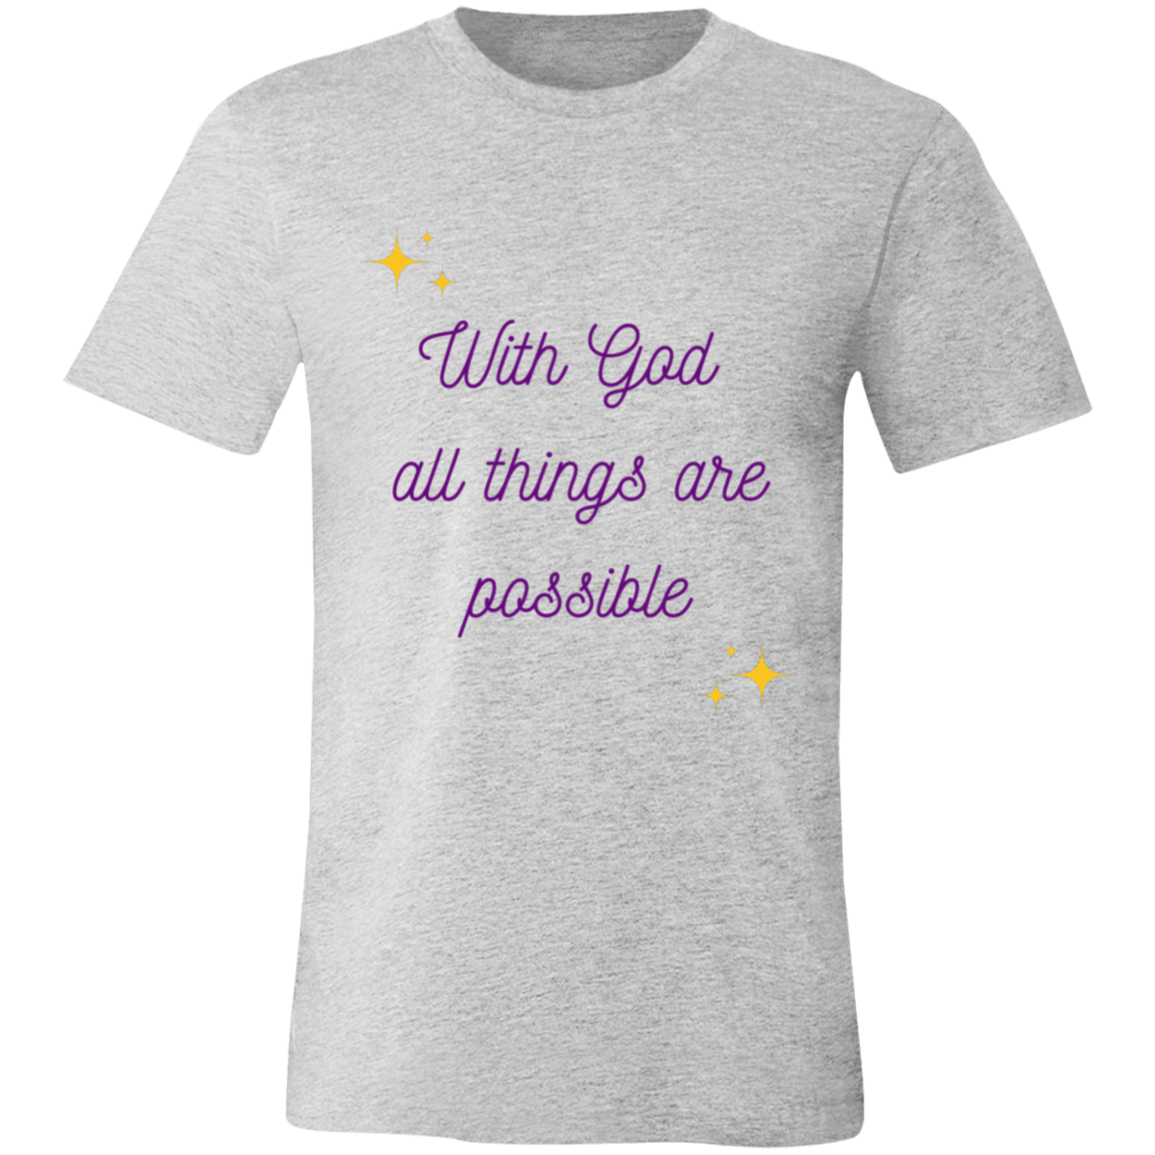 All Things Are Possible - Jersey Short-Sleeve T-Shirt